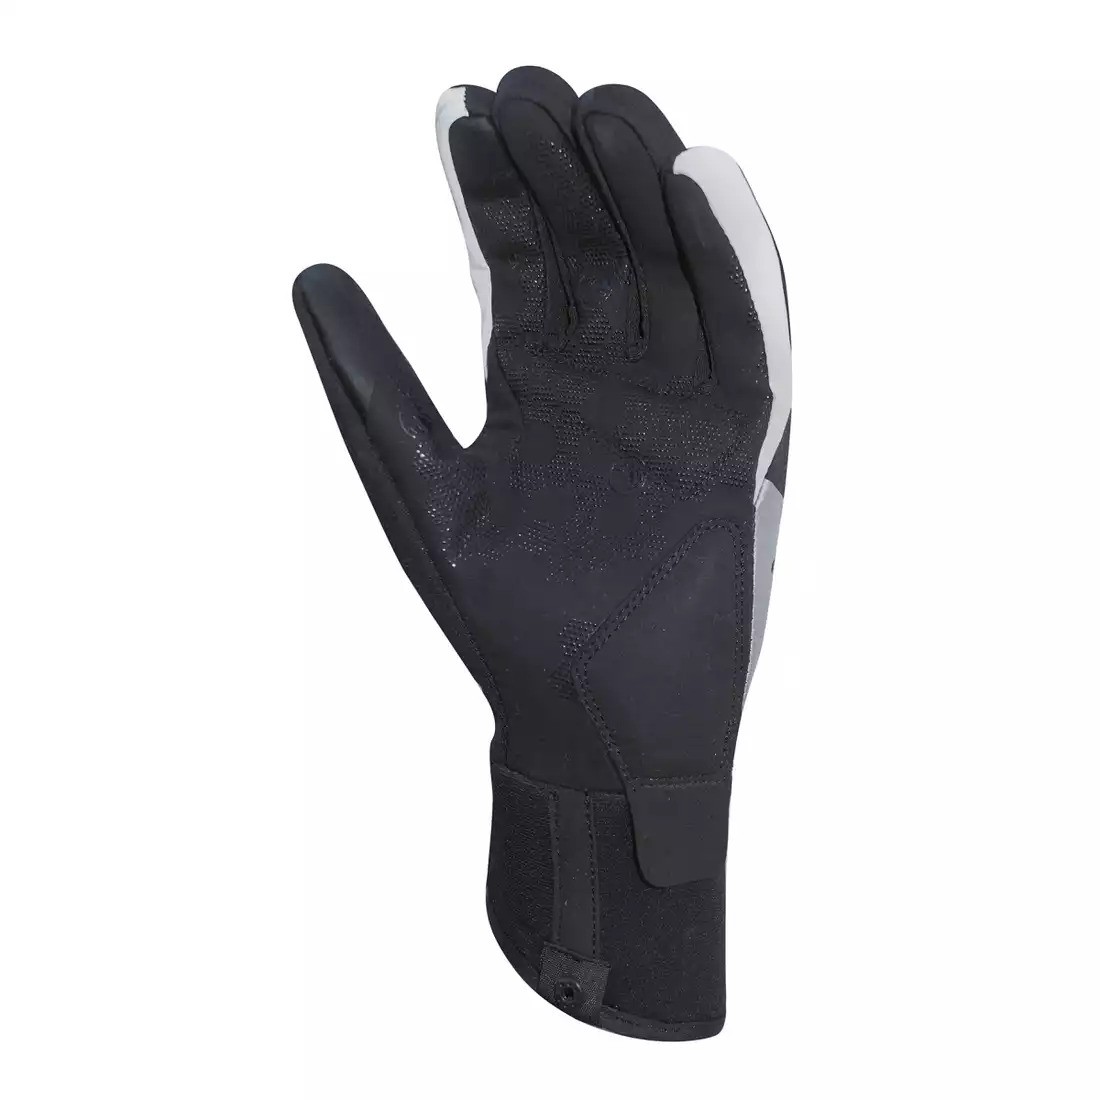 CHIBA VOYAGER Winter cycling gloves, black